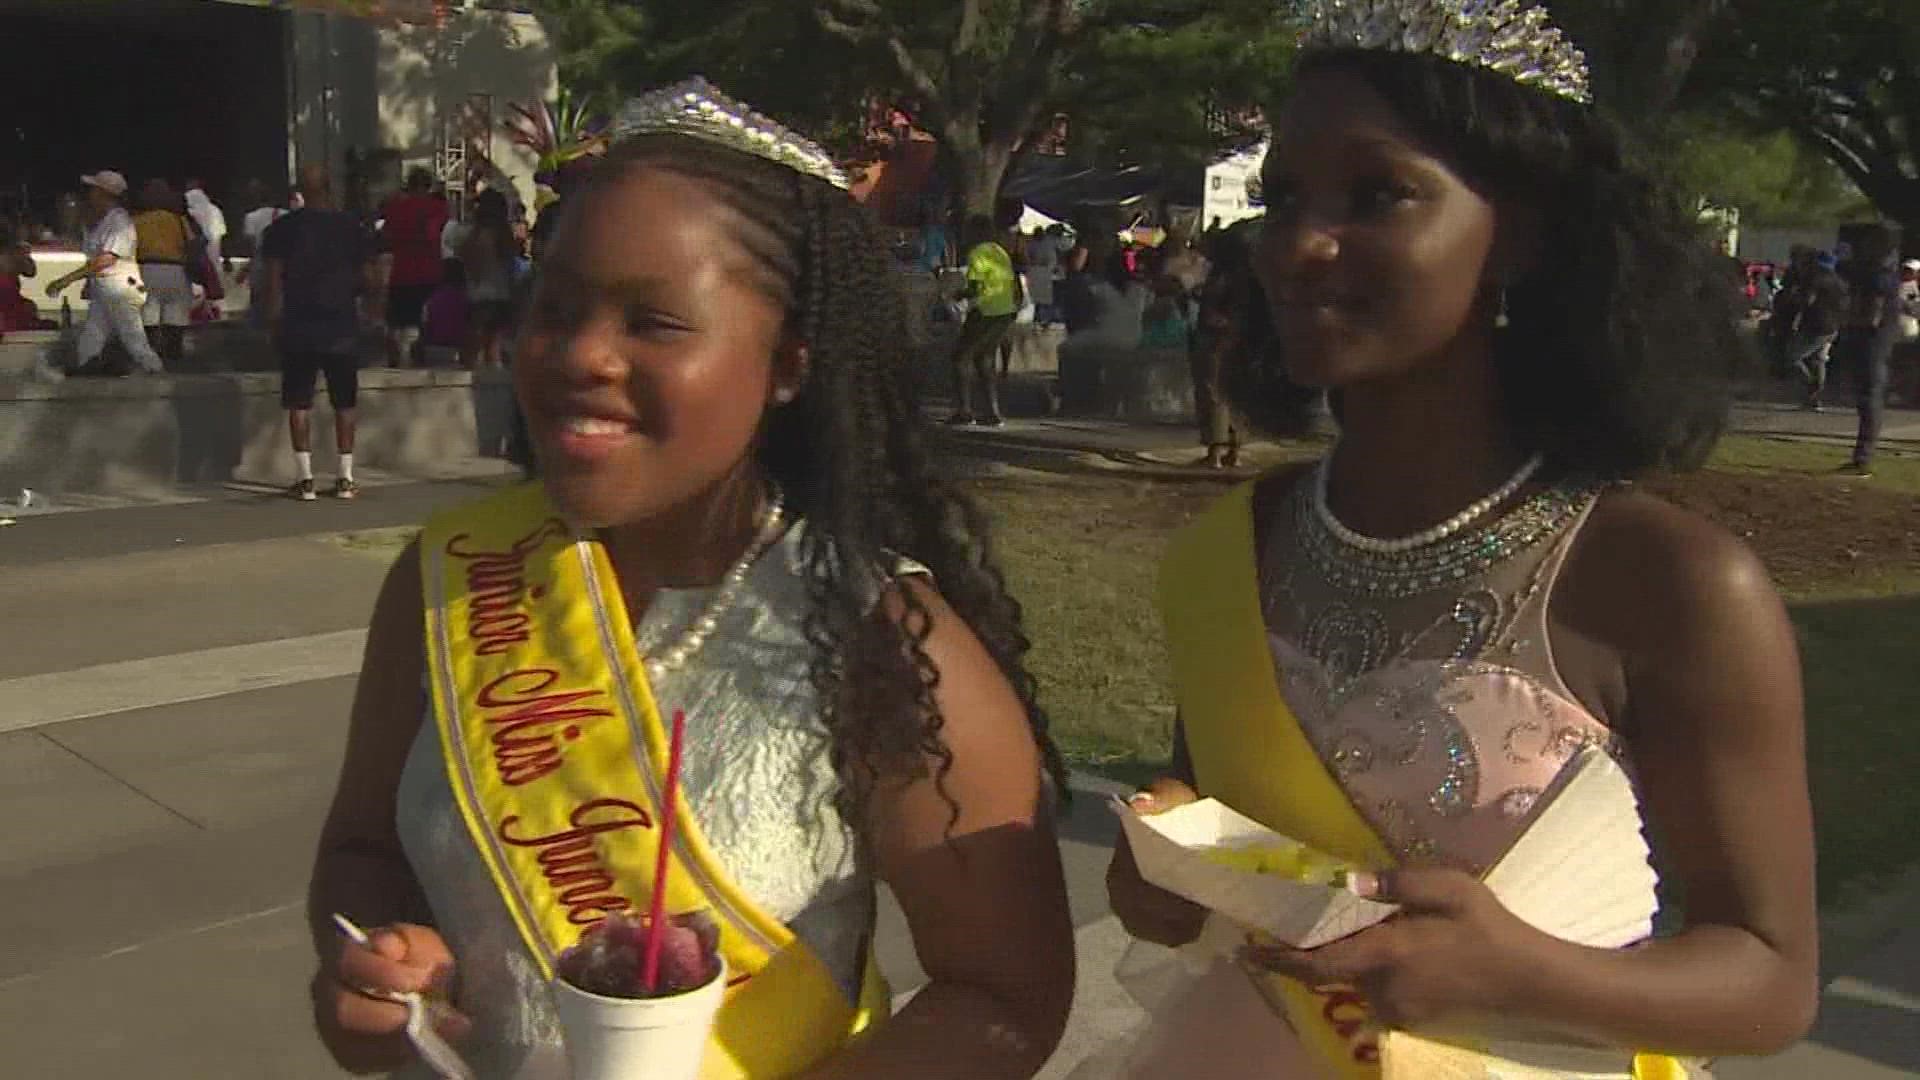 Thousands of people turned out at the Third Ward park to honor the past while looking forward to the future.